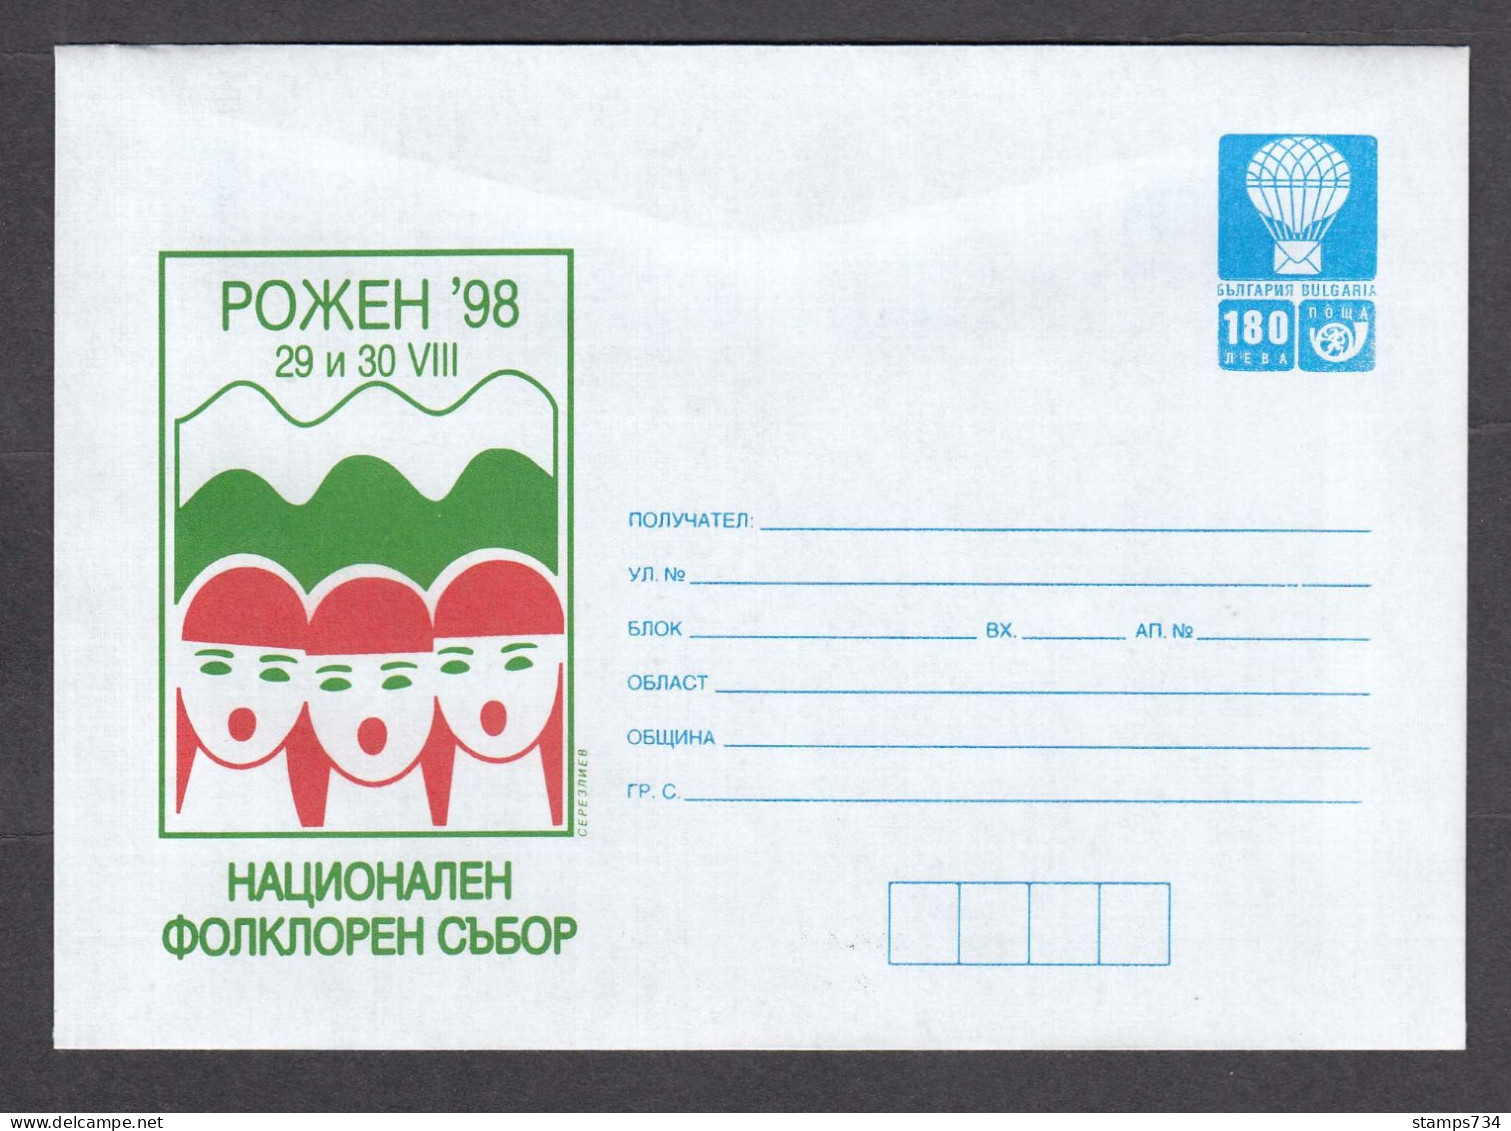 PS 1299/1998 - Mint, National Folklore Festival, Rozhen, 29.-30.8.1998, Post. Stationery - Bulgaria - Covers